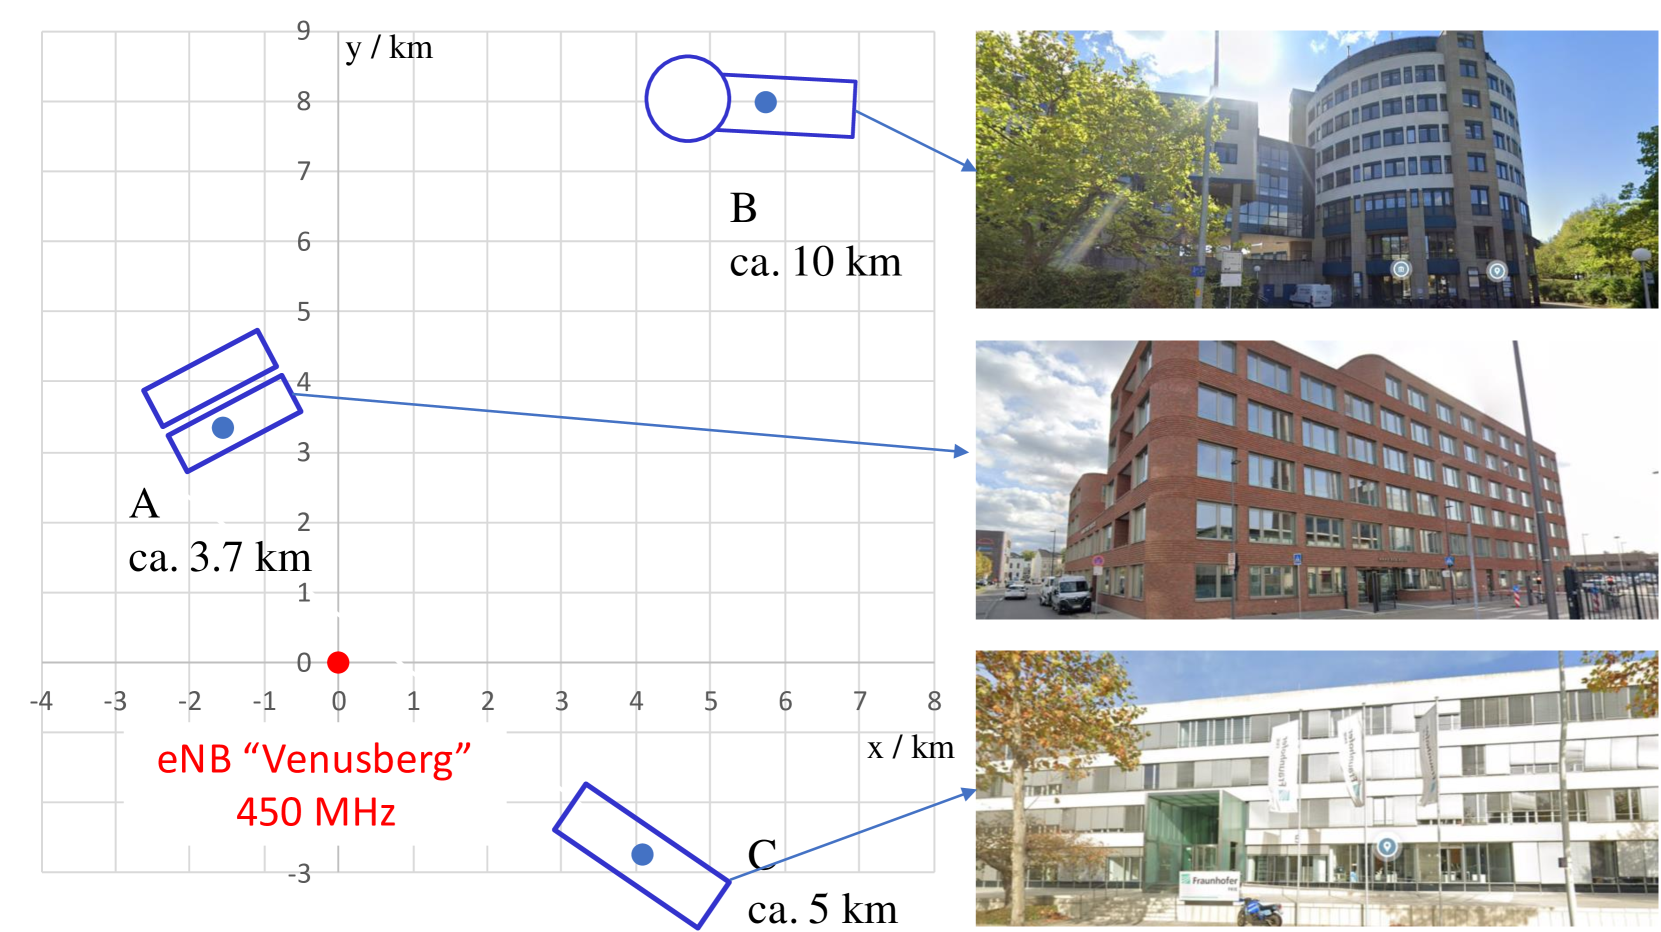 Measurements of Building Attenuation in 450 MHz LTE Networks